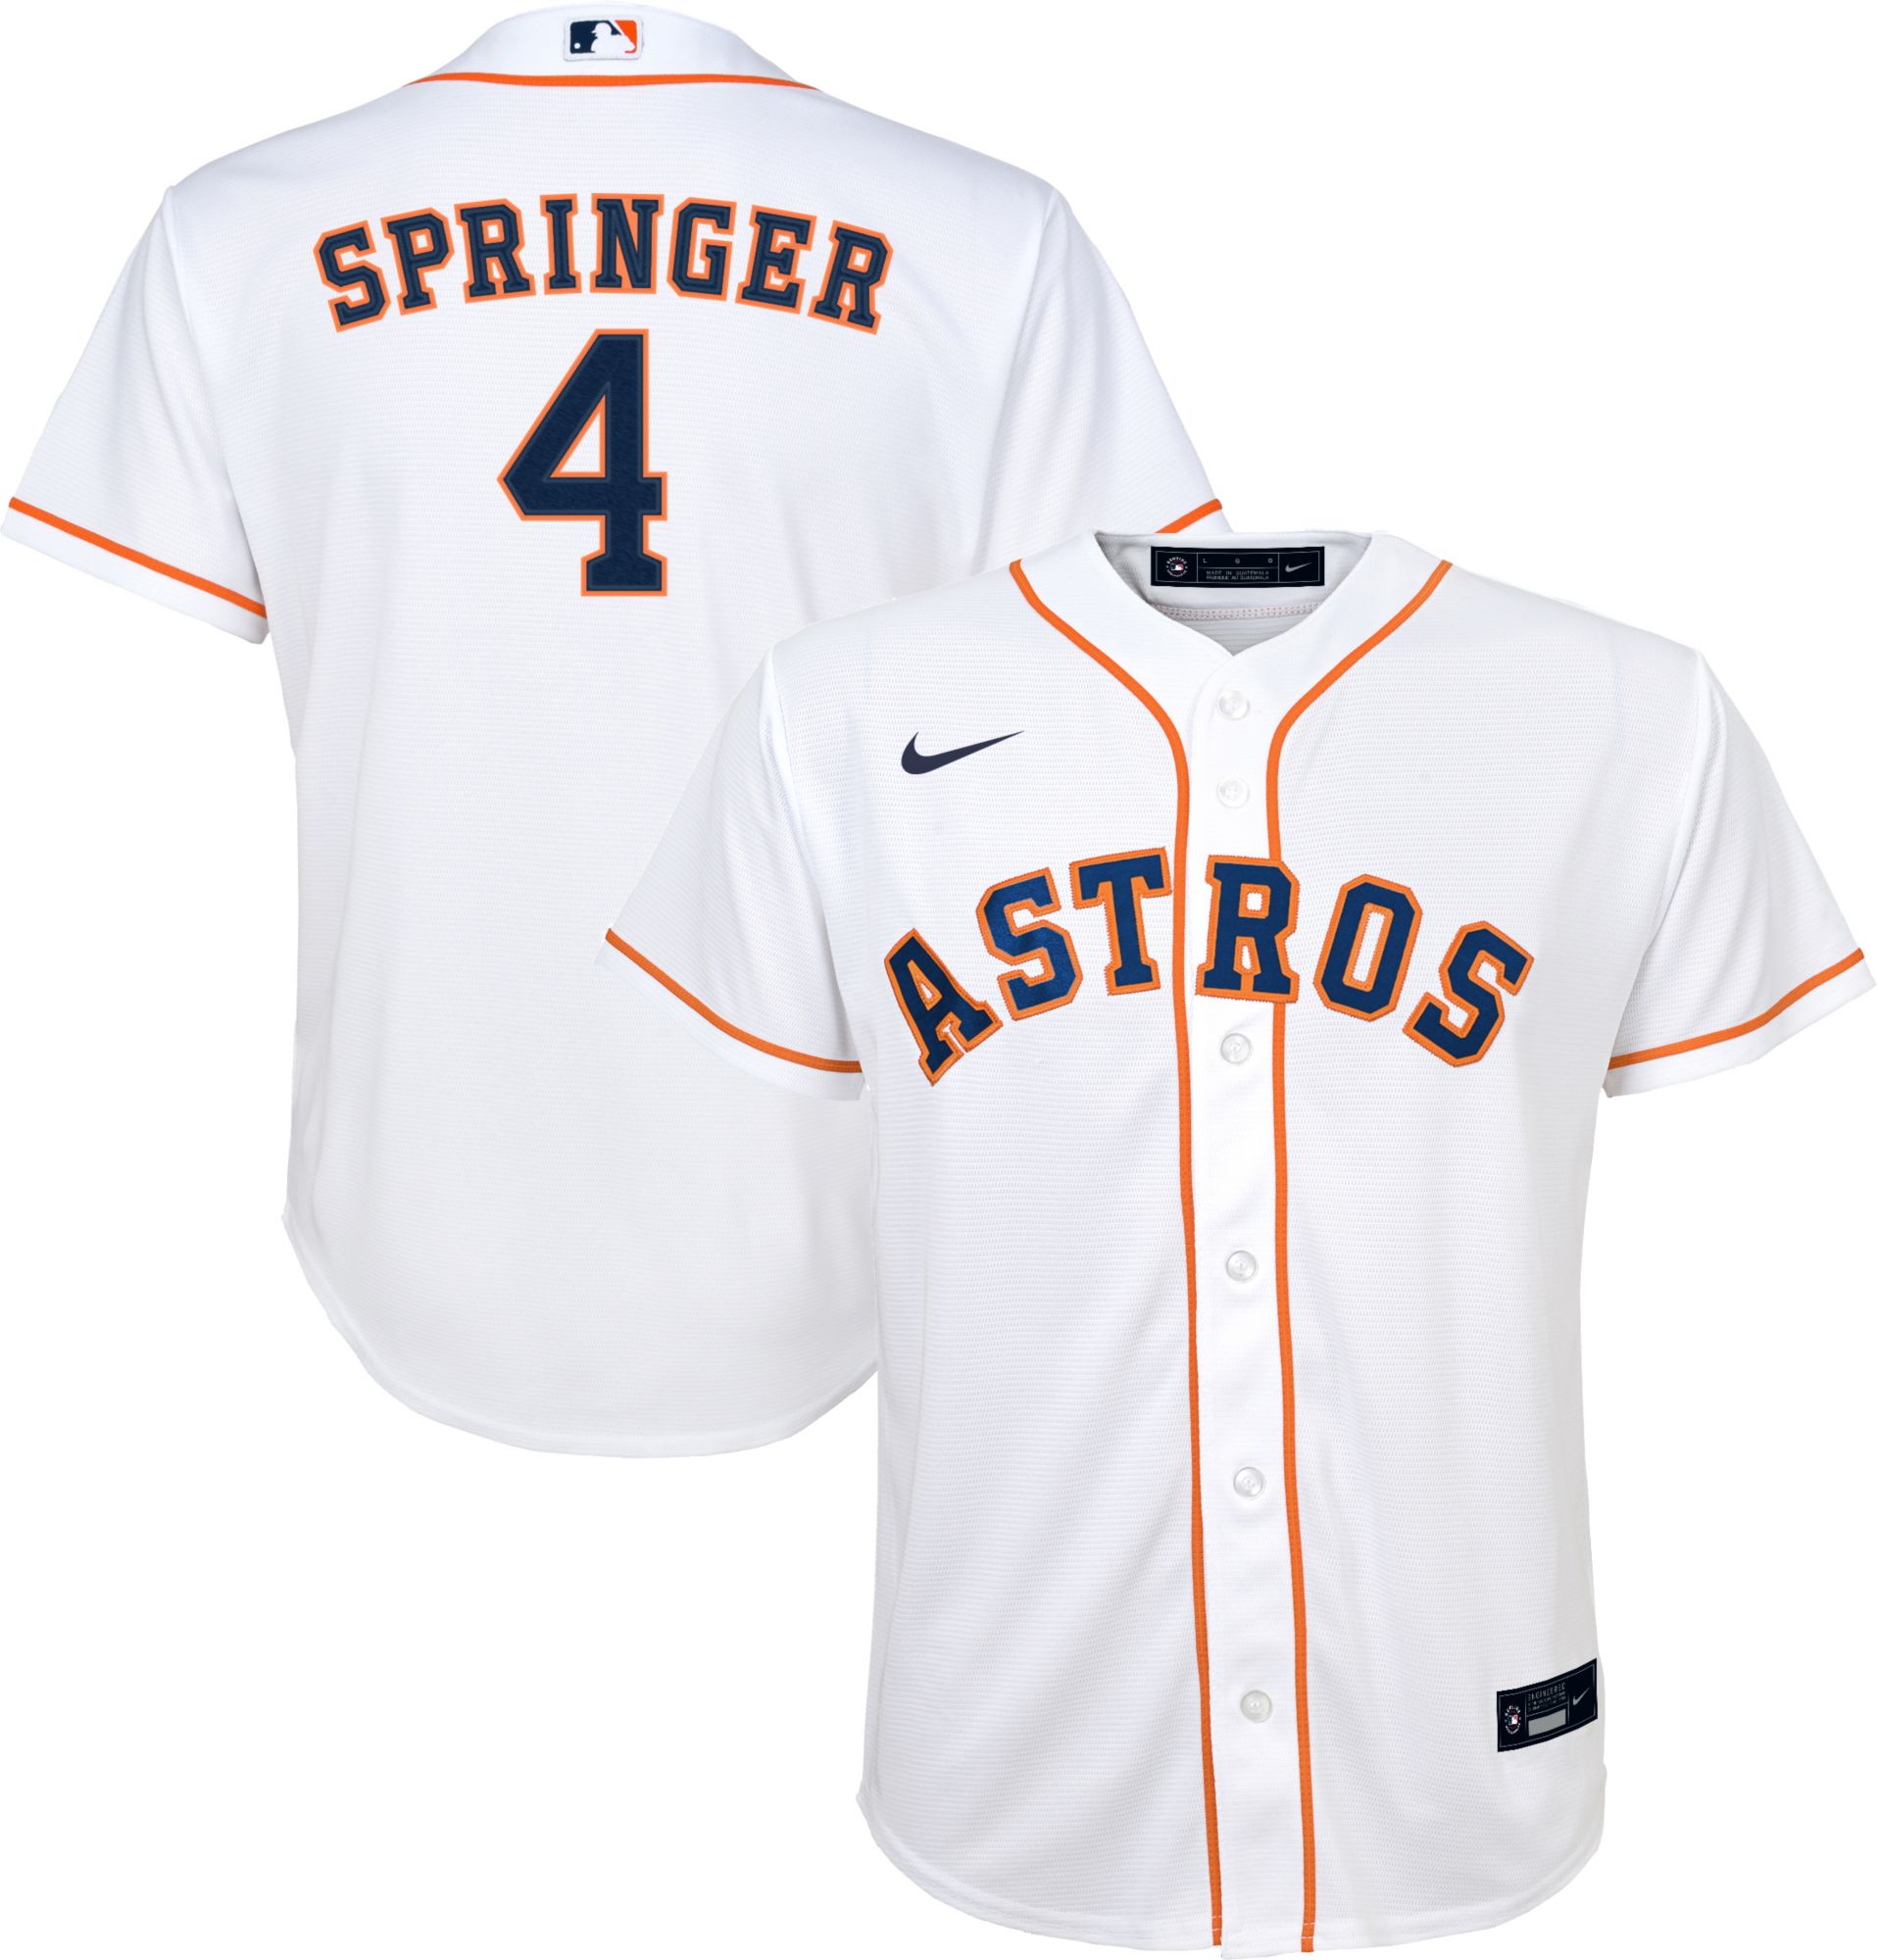 houston astros jersey youth